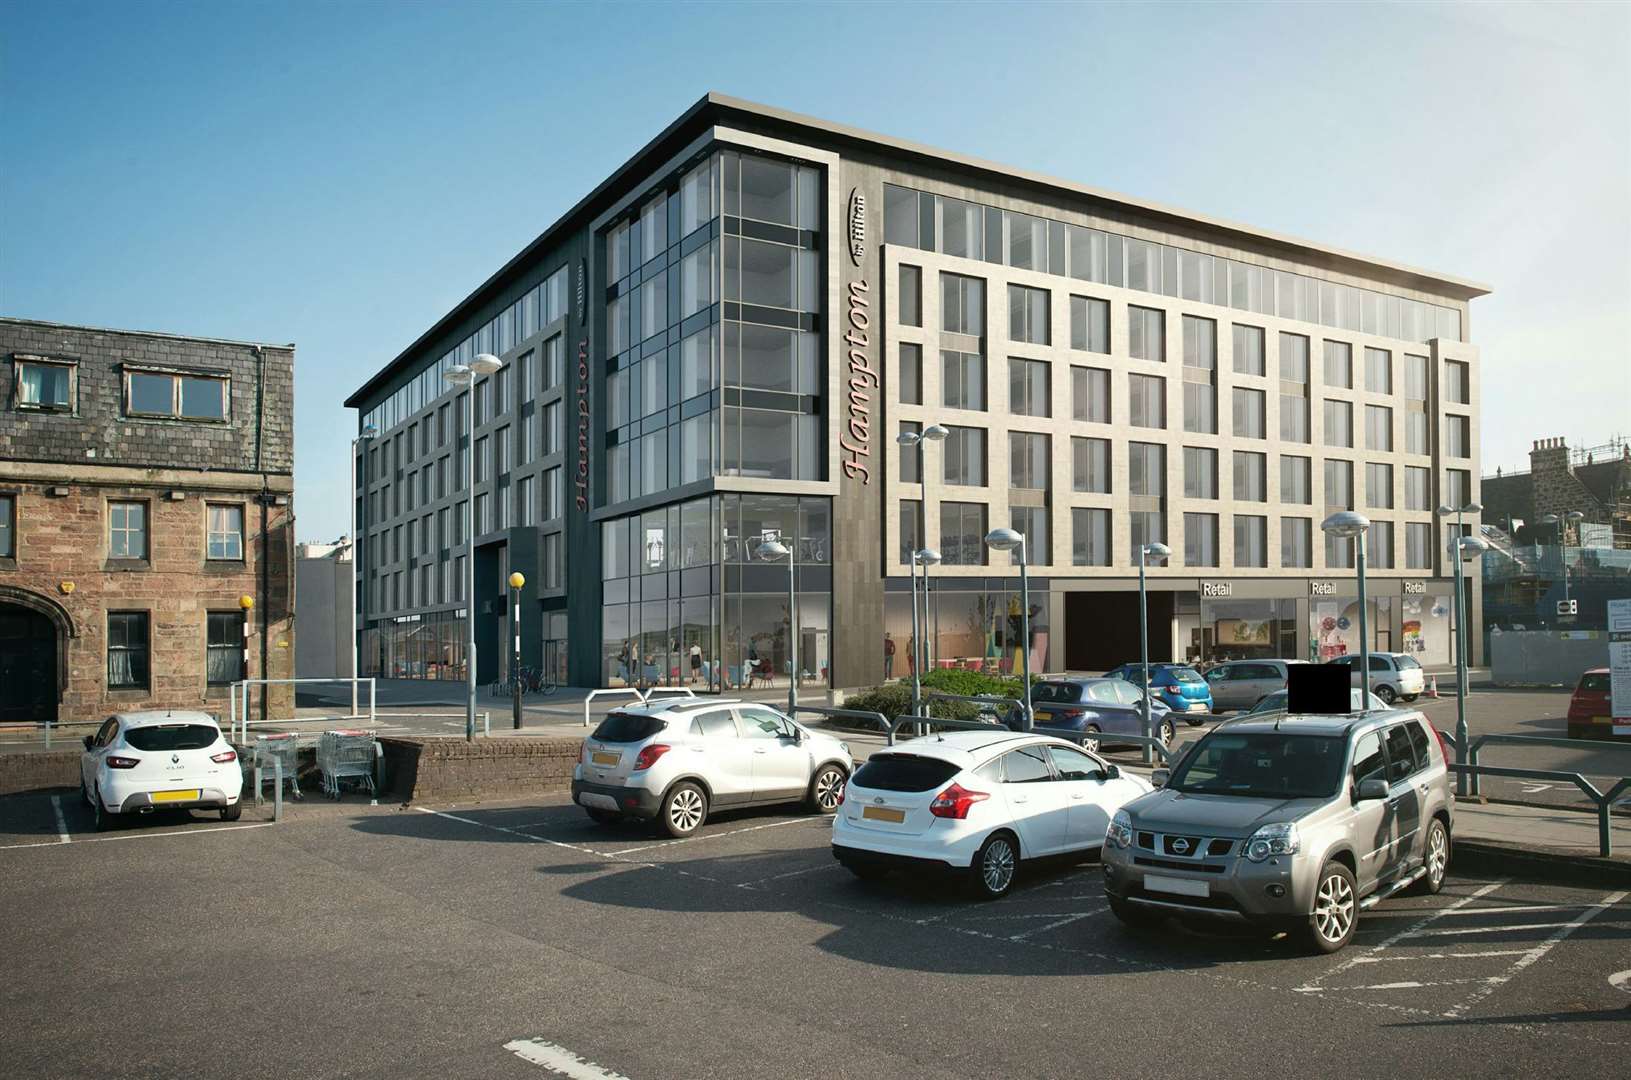 Artist's impression of how the new hotel will look.